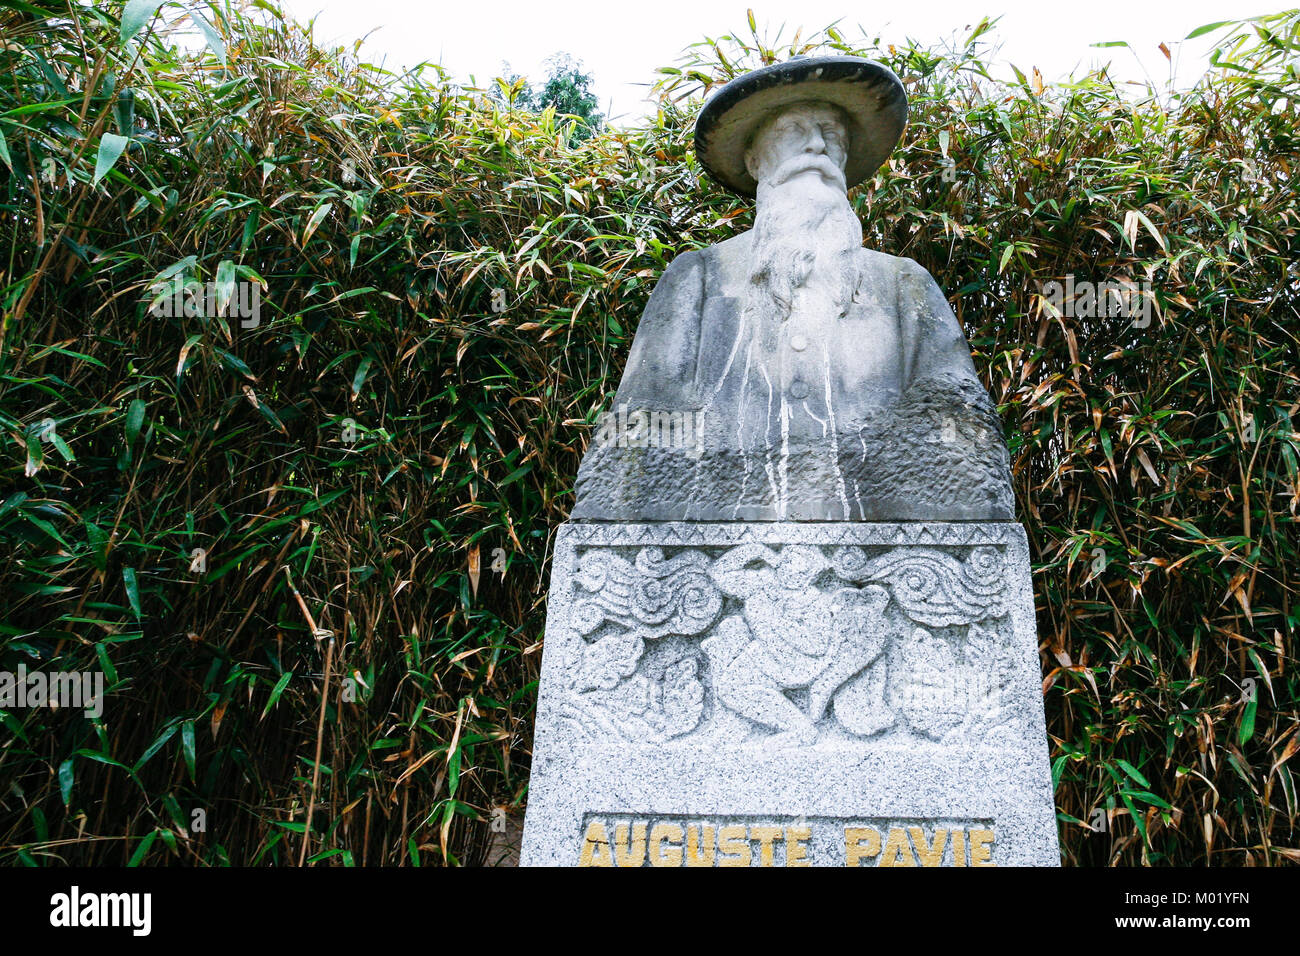 Auguste jean marie pavie hi-res stock photography and images - Alamy